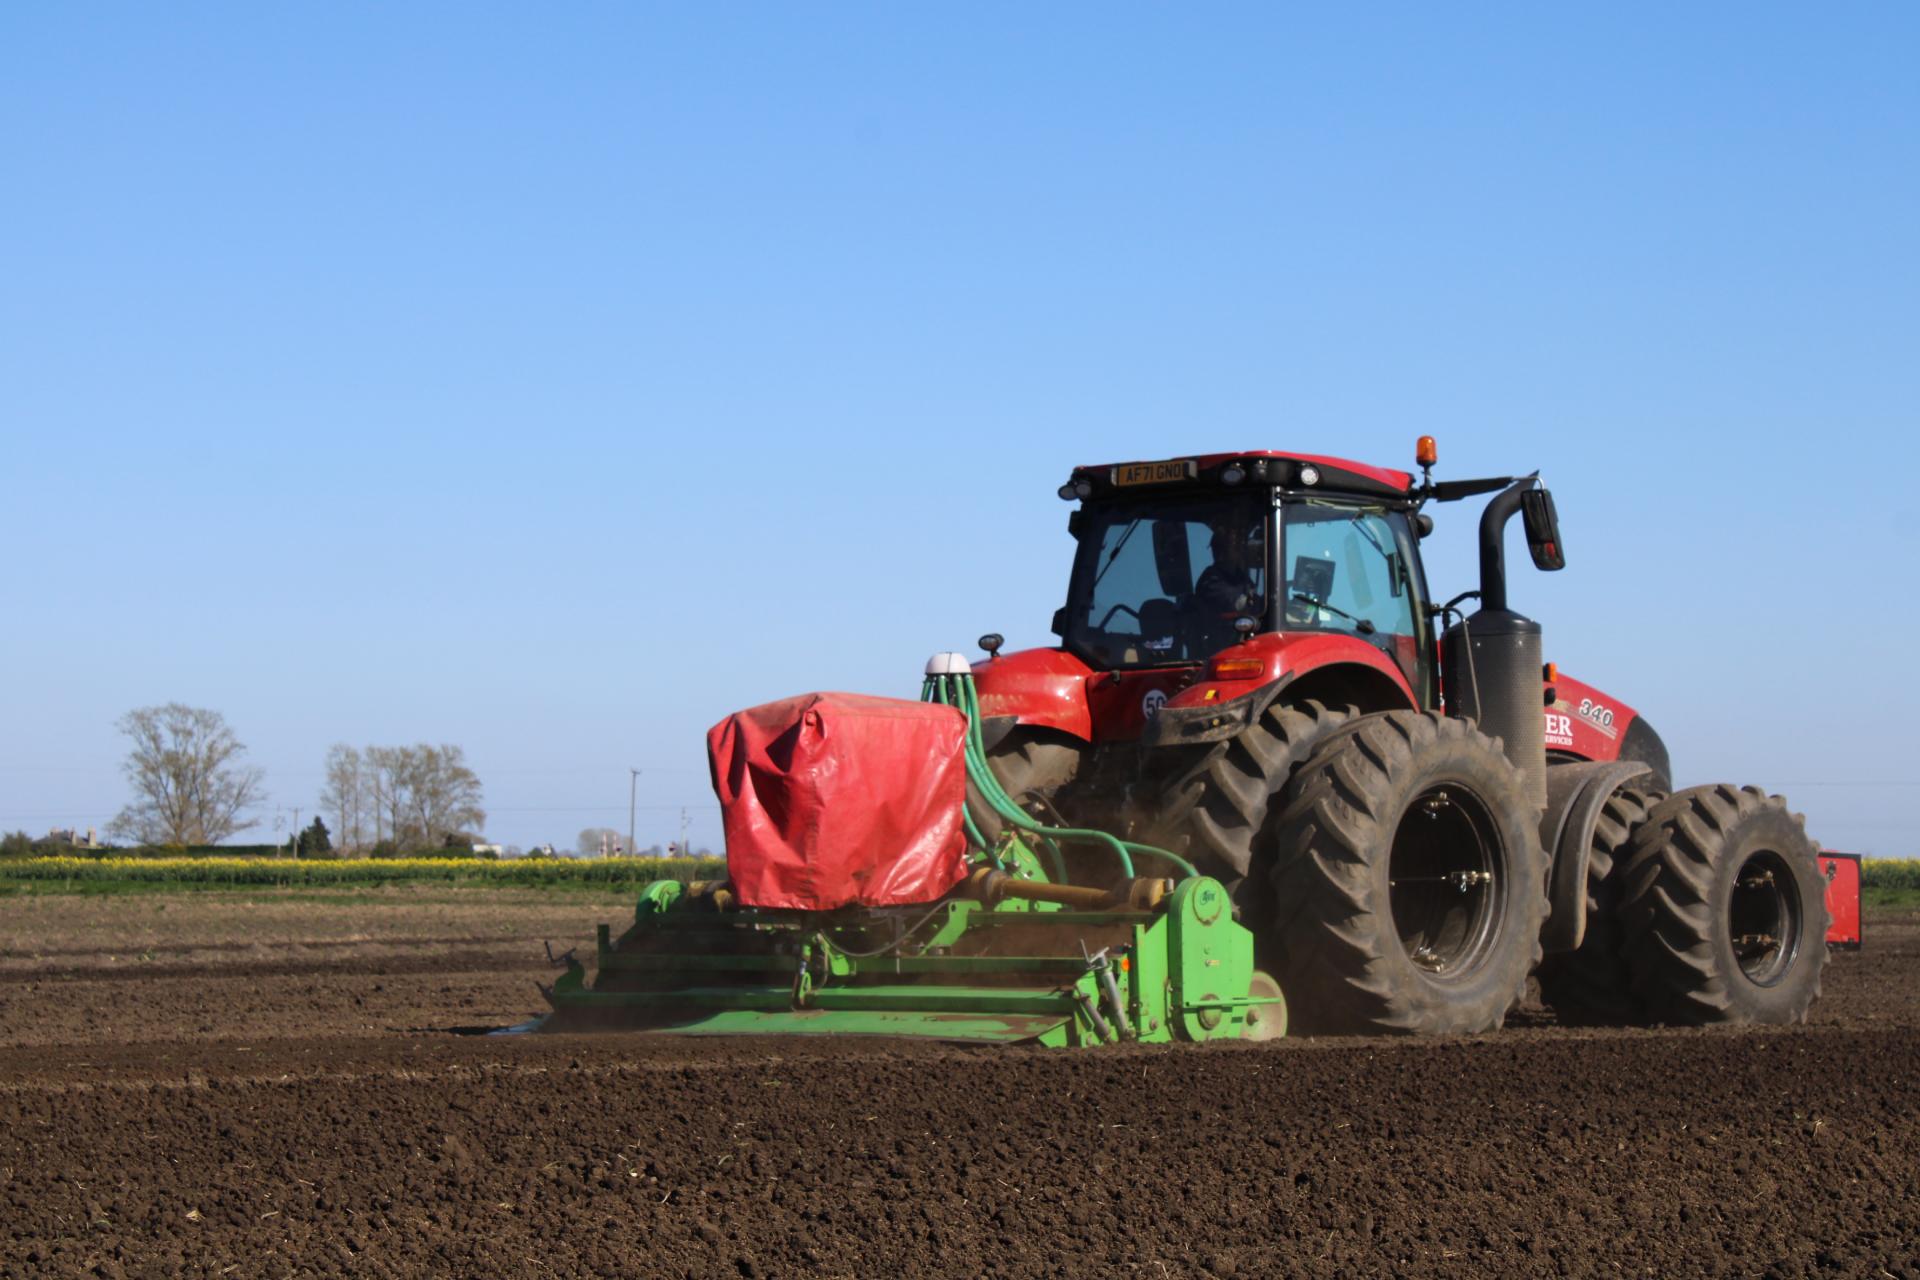 Glover red tractor working in the field for seed bed preparation